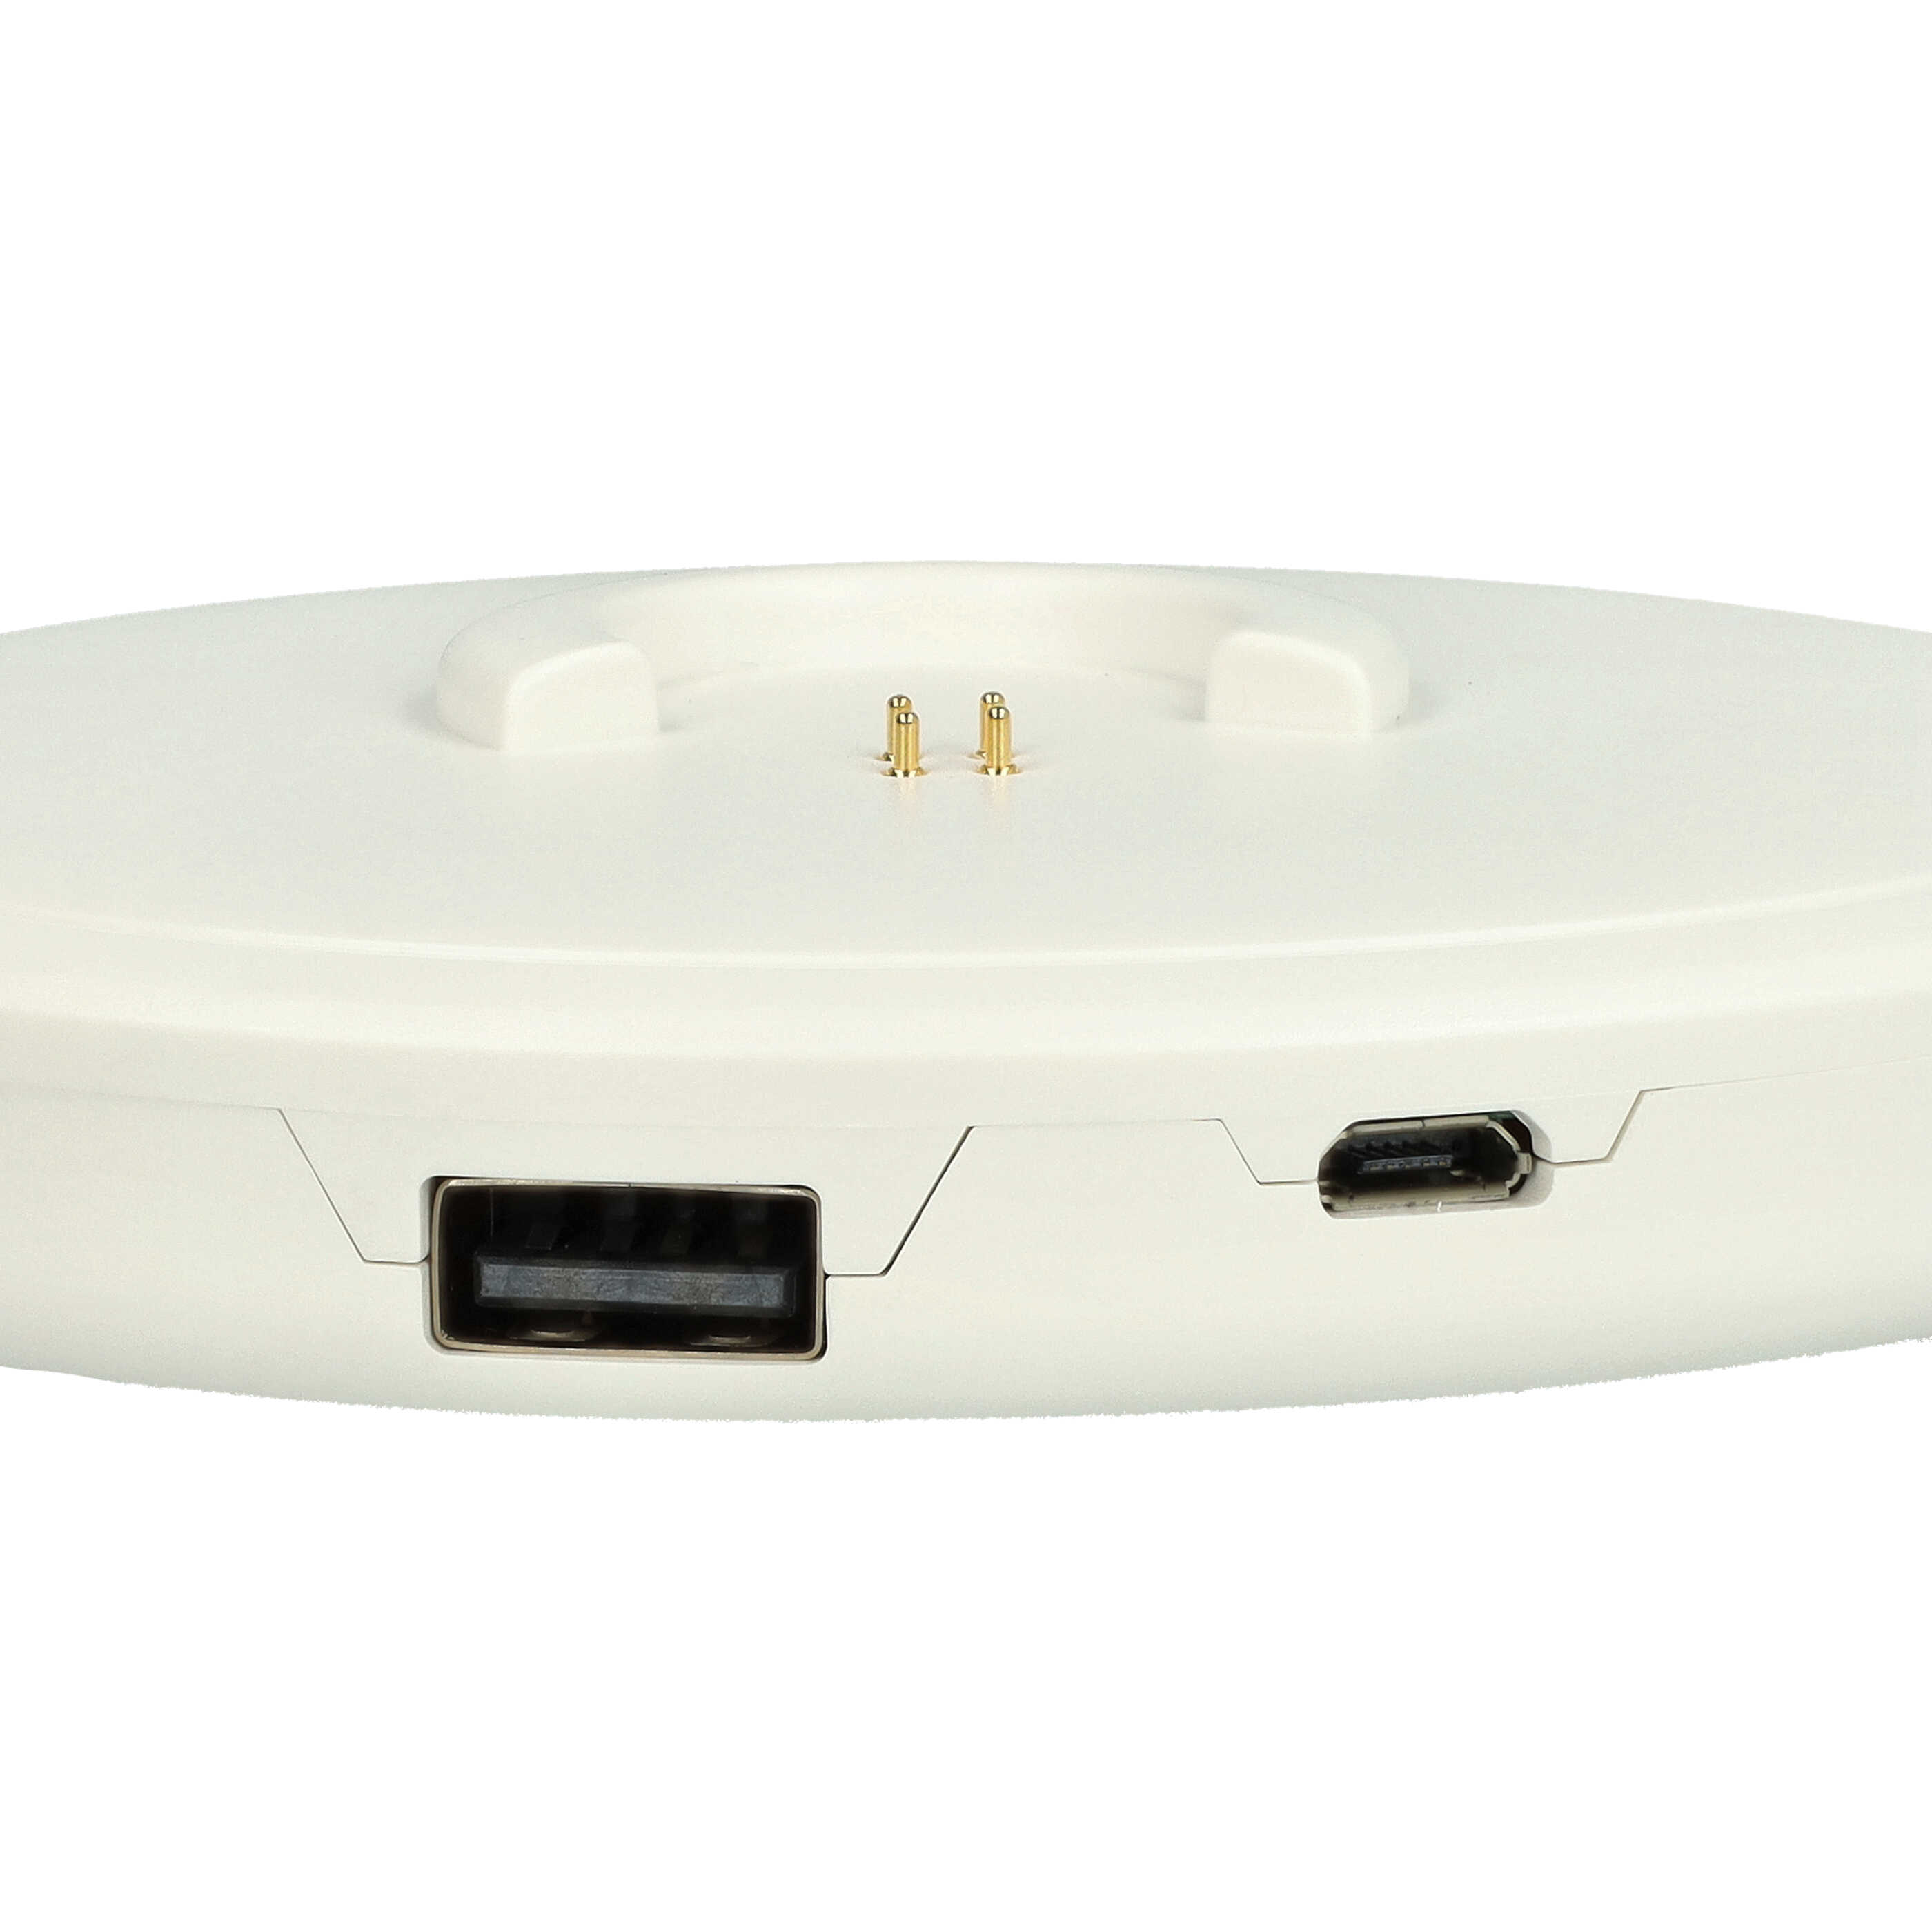 USB Charging Station Suitable for Bose Loudspeakers - Incl. Micro USB Cable White